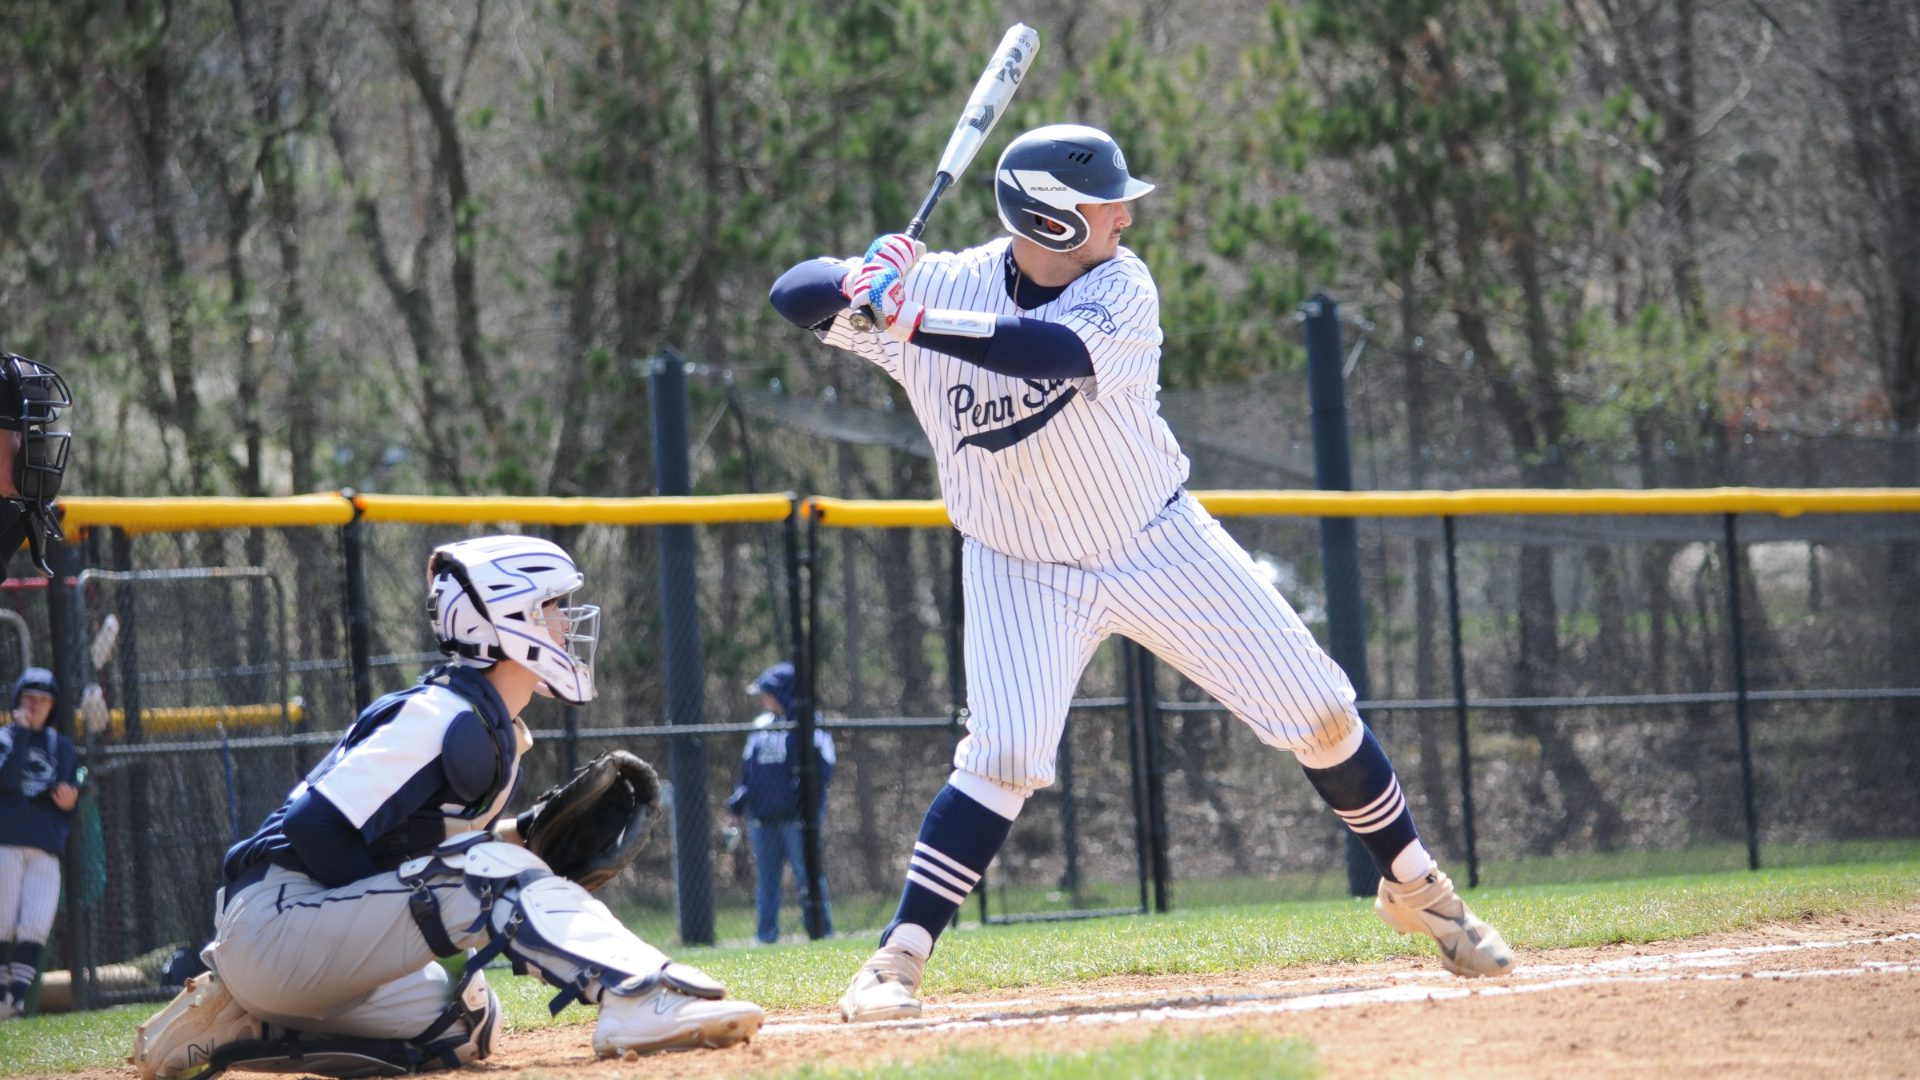 Zach Benson went 3-5 with 2 doubles, 1 run, and 3 RBI's in the Lions road game at Valley Forge Tuesday night.